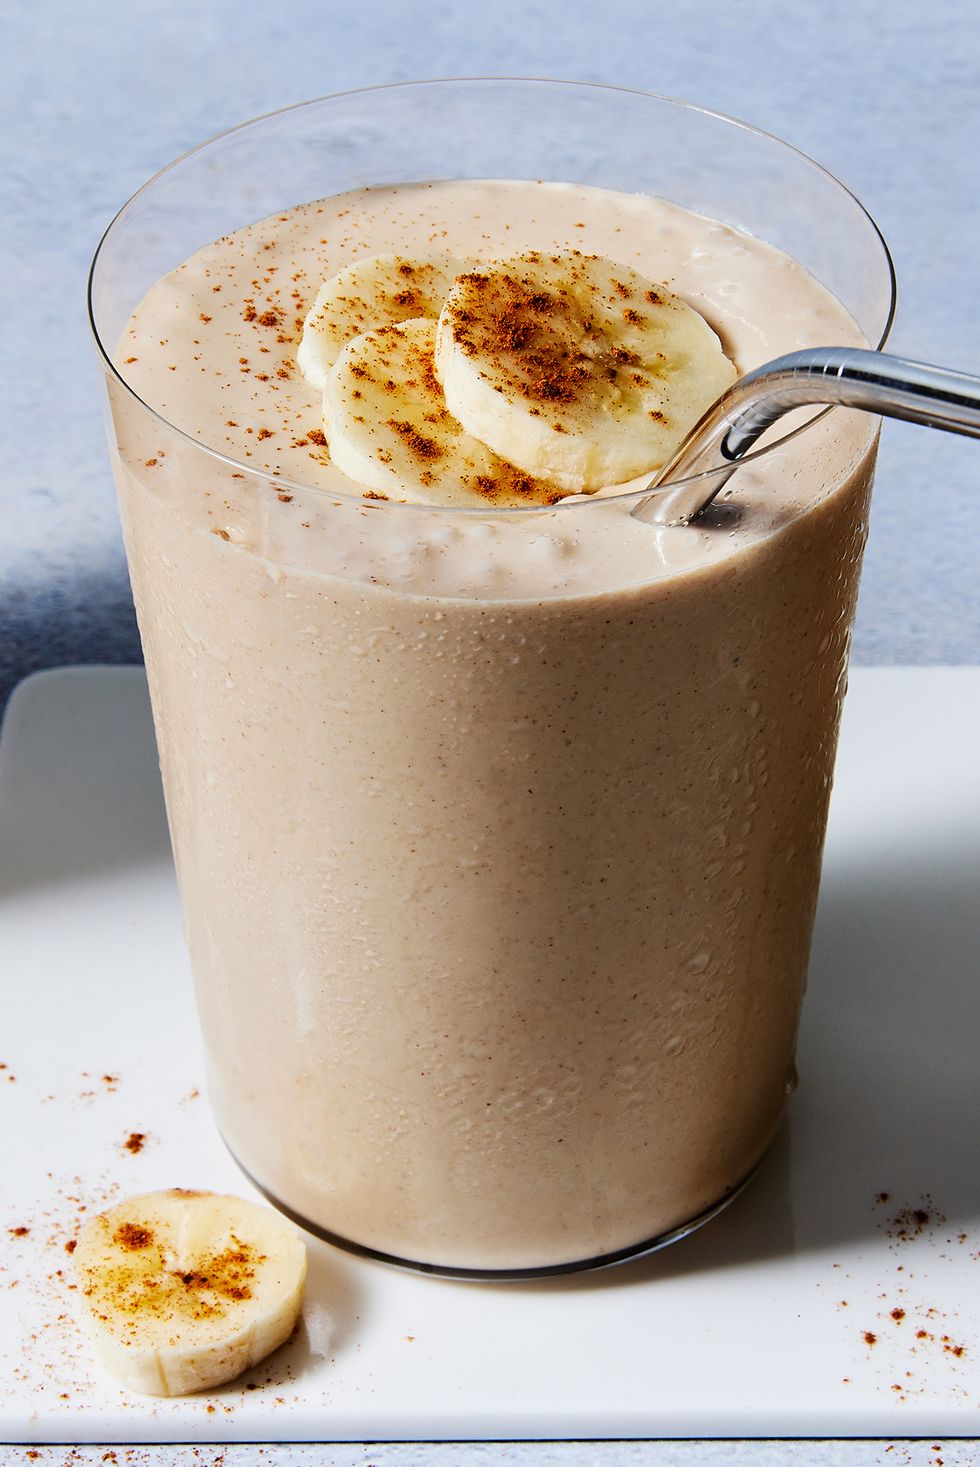 peanut butter banana smoothie with banana slices and cinnamon on top